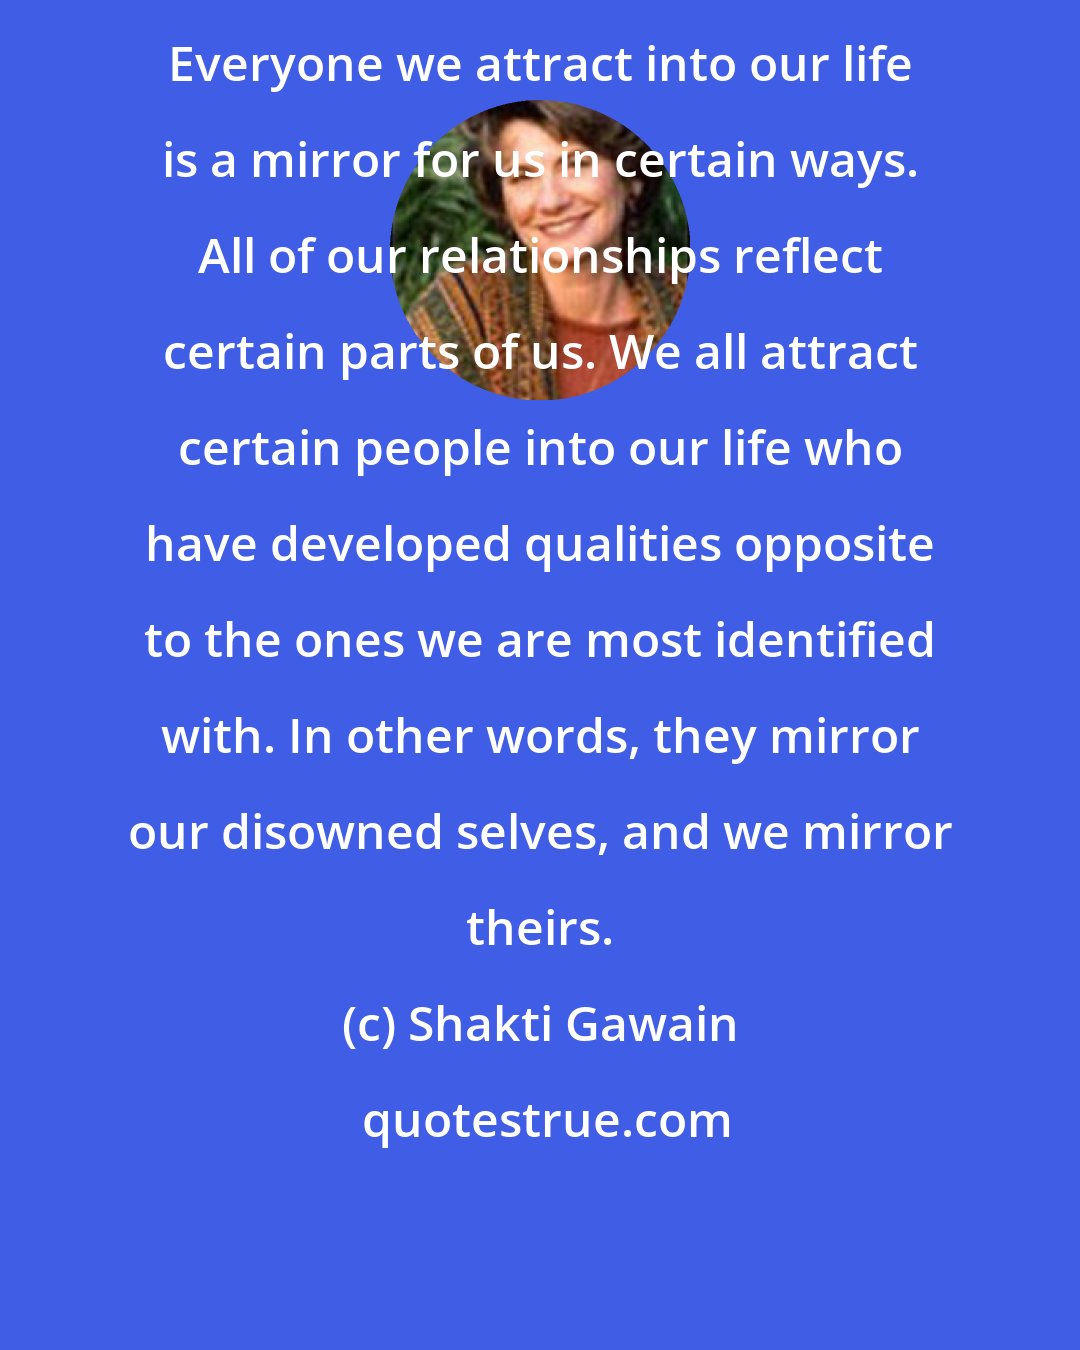 Shakti Gawain: Everyone we attract into our life is a mirror for us in certain ways. All of our relationships reflect certain parts of us. We all attract certain people into our life who have developed qualities opposite to the ones we are most identified with. In other words, they mirror our disowned selves, and we mirror theirs.